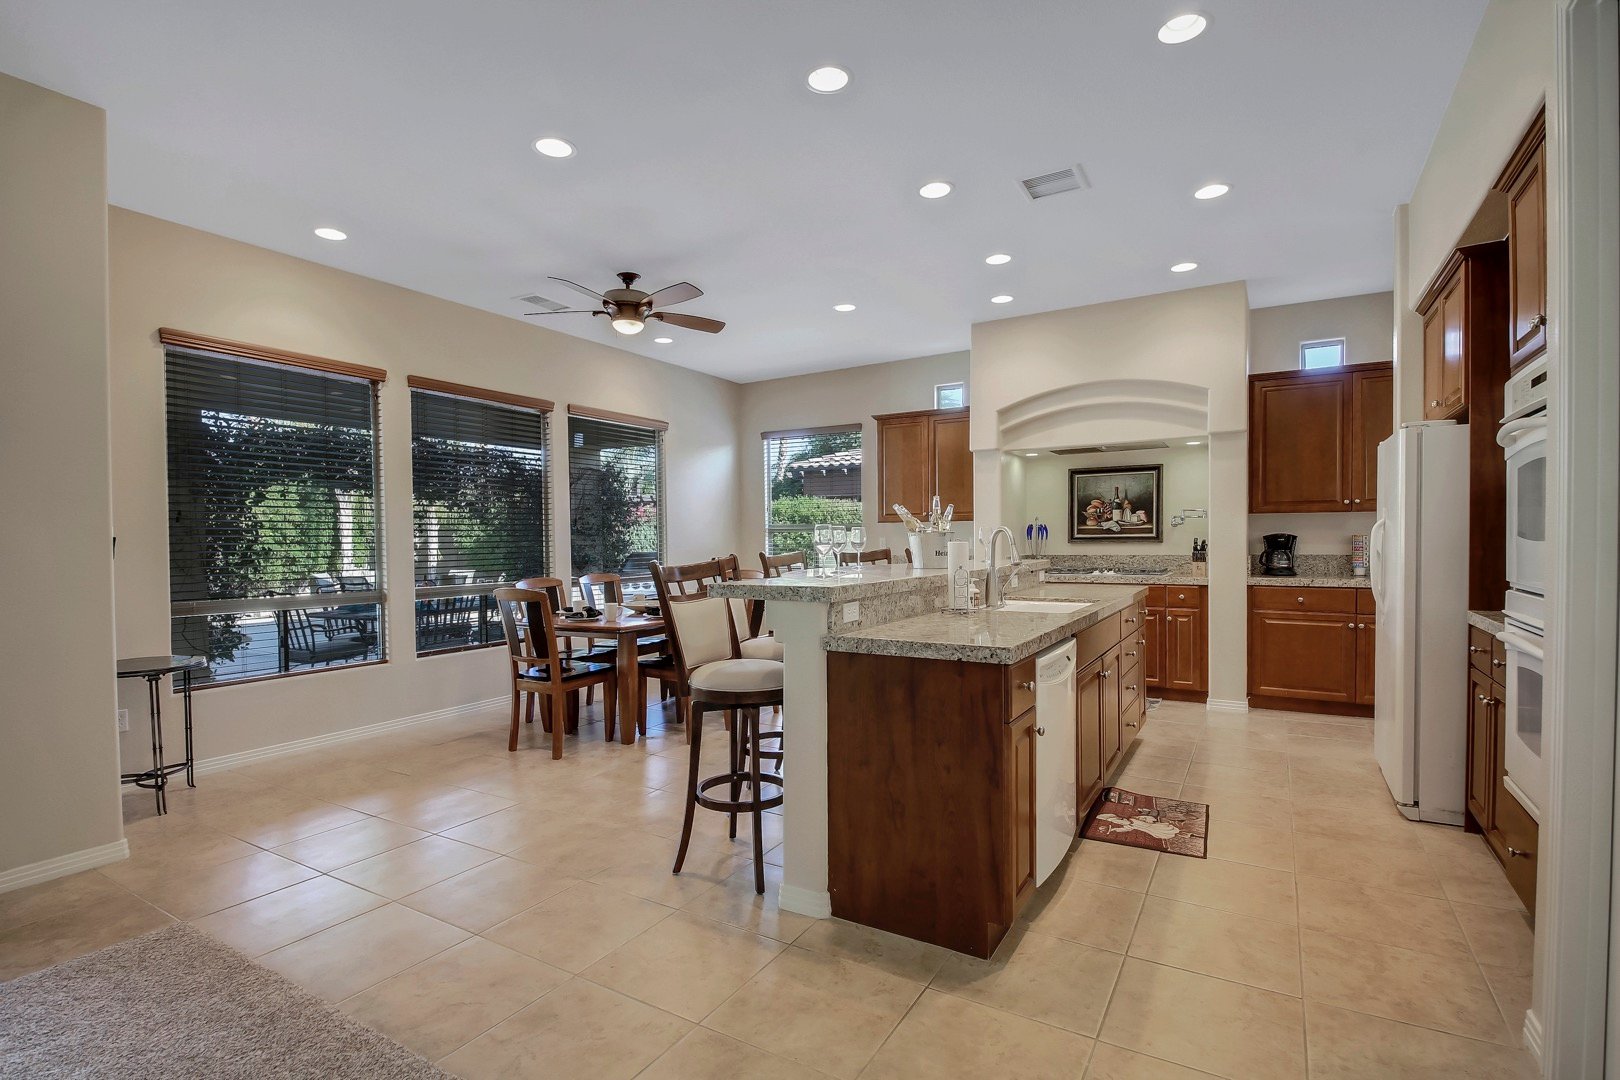 The spacious gourmet kitchen will be fully equipped to cook your favorite meals.